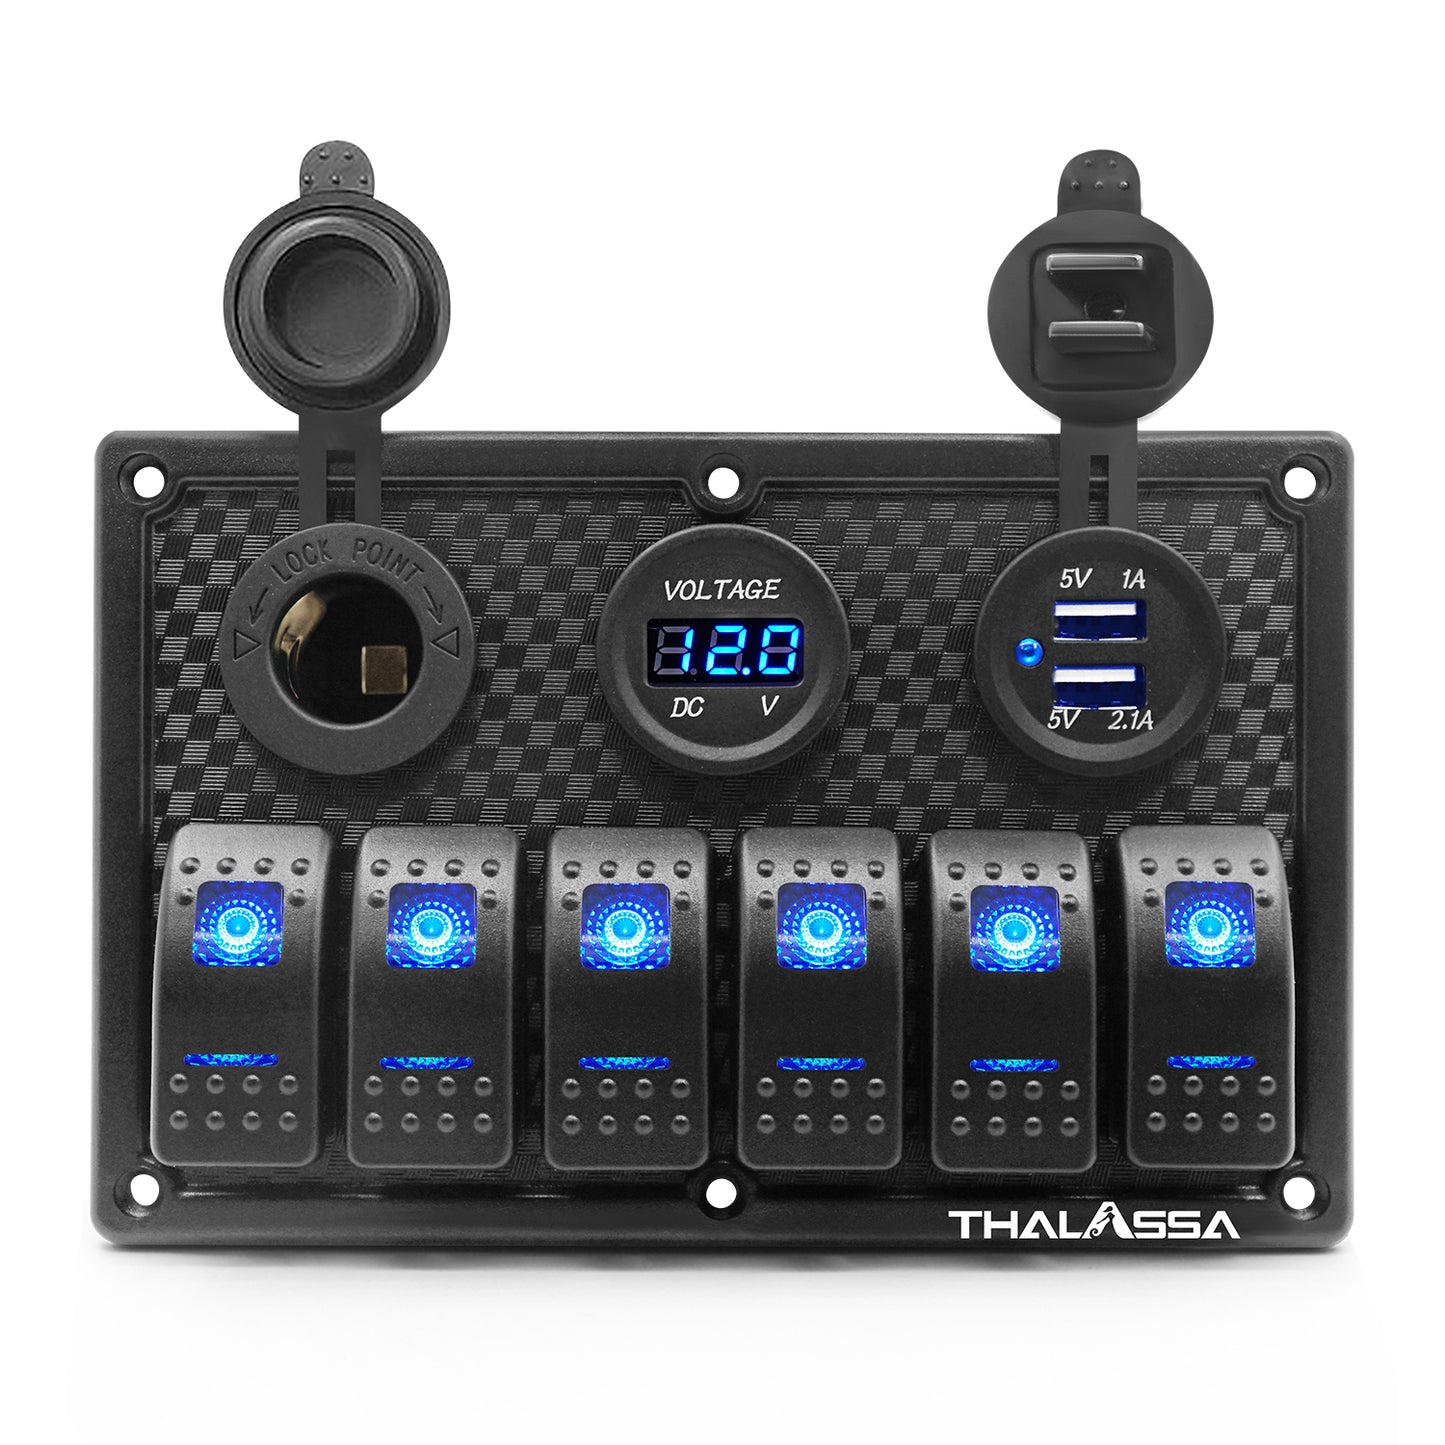 THALASSA 4/6 Gang Rocker Switch Panel, 12V/24V Waterproof Blue LED Lighted Toggle Fuse Breaker Protected Control with 12 Volt Marine USB Power Outlet for Car Boat RV Scooter Truck Vehicles - THALASSA